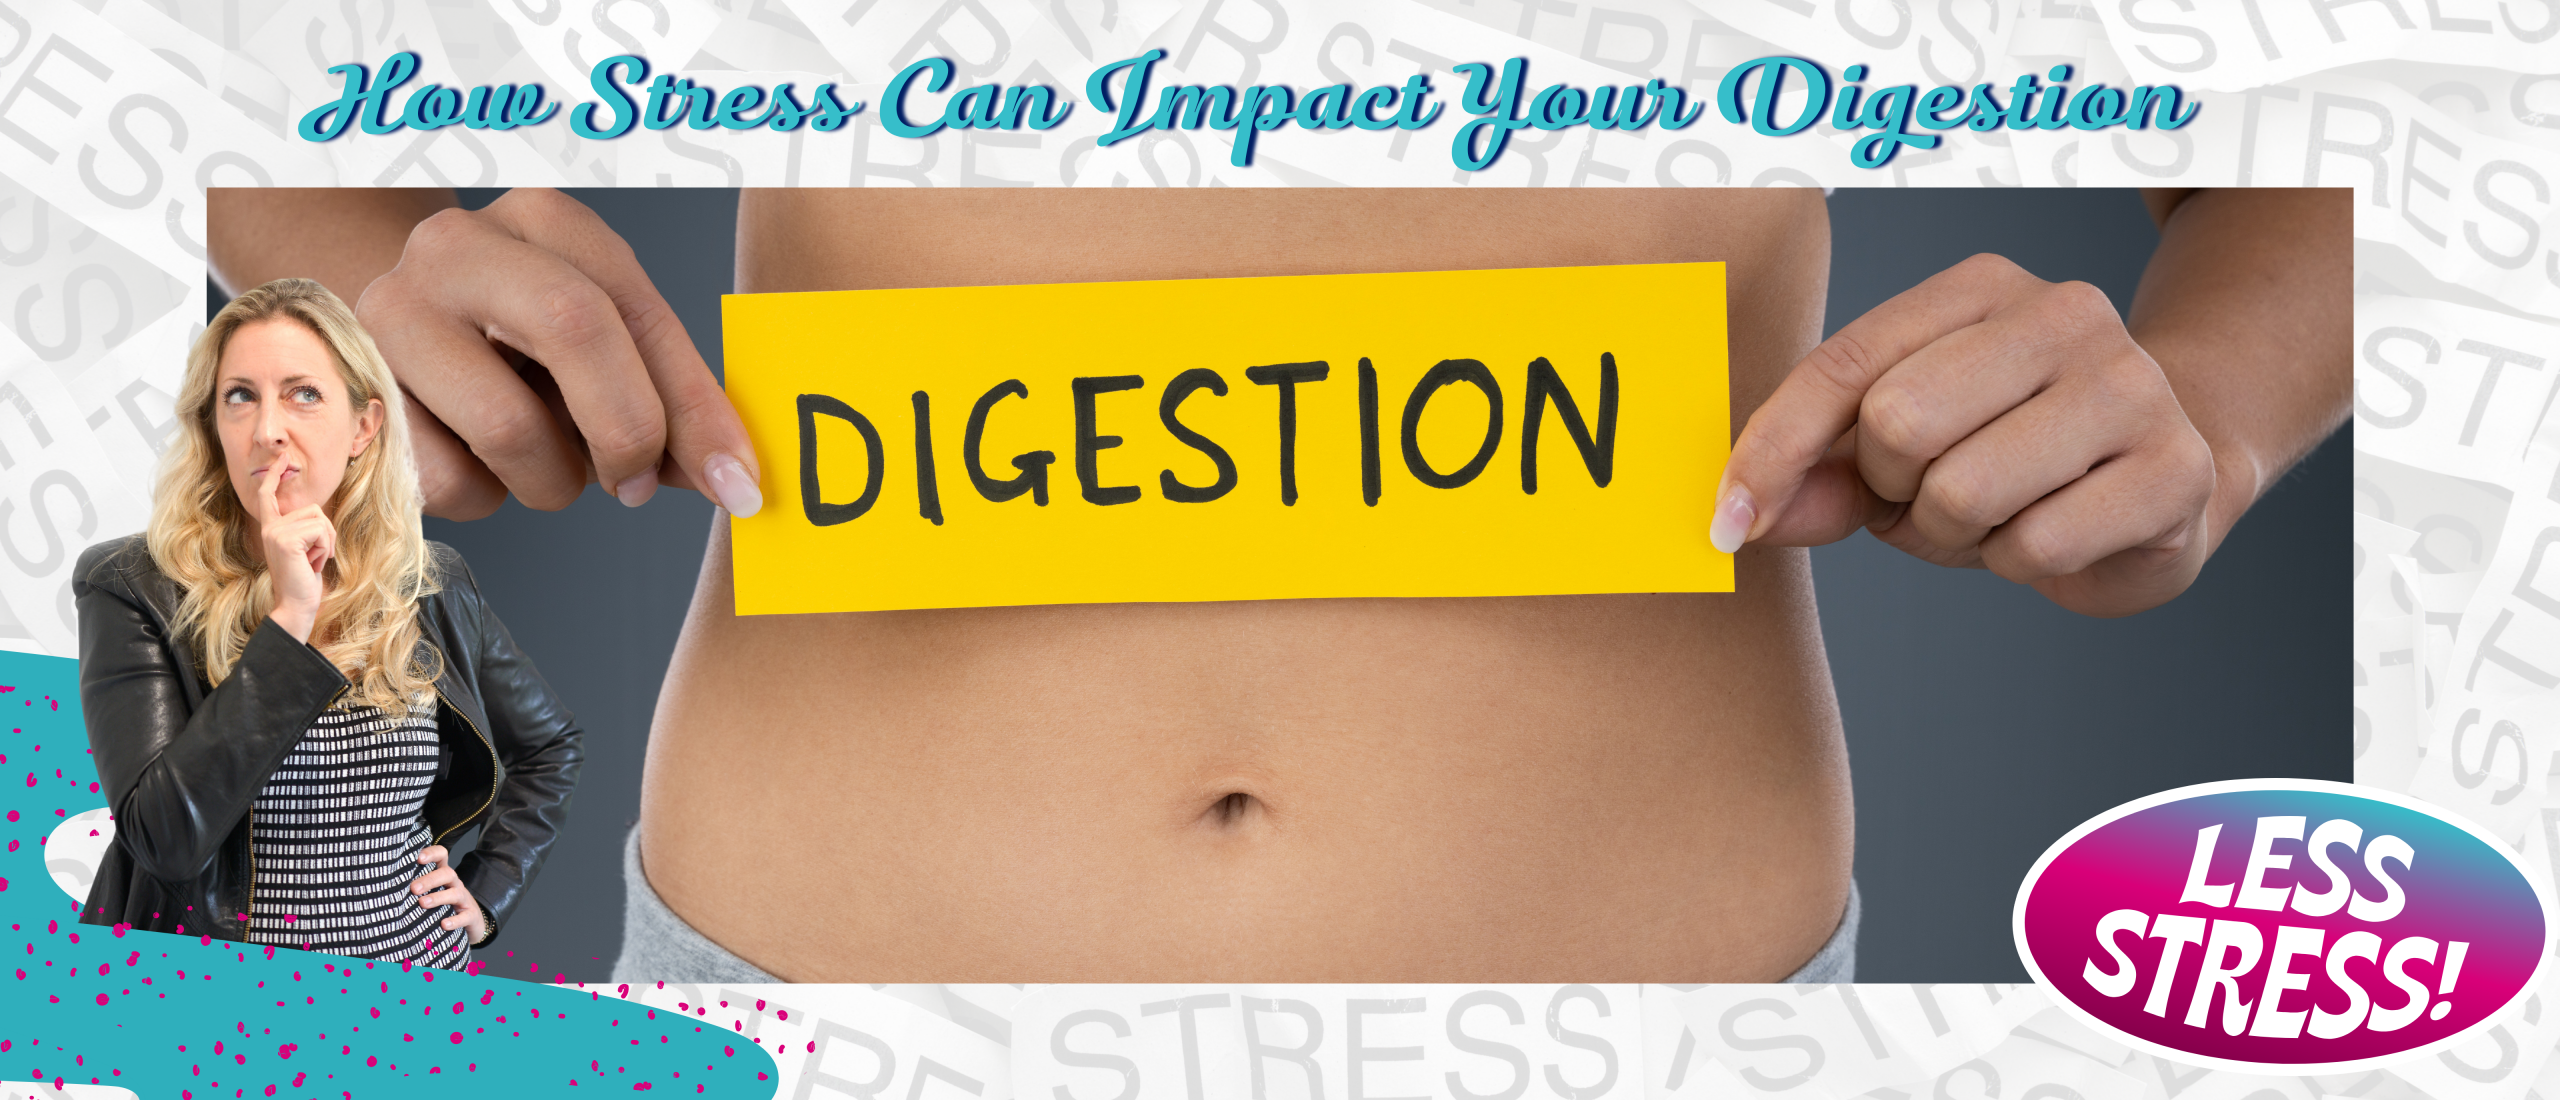 How Stress Can Impact Your Digestion